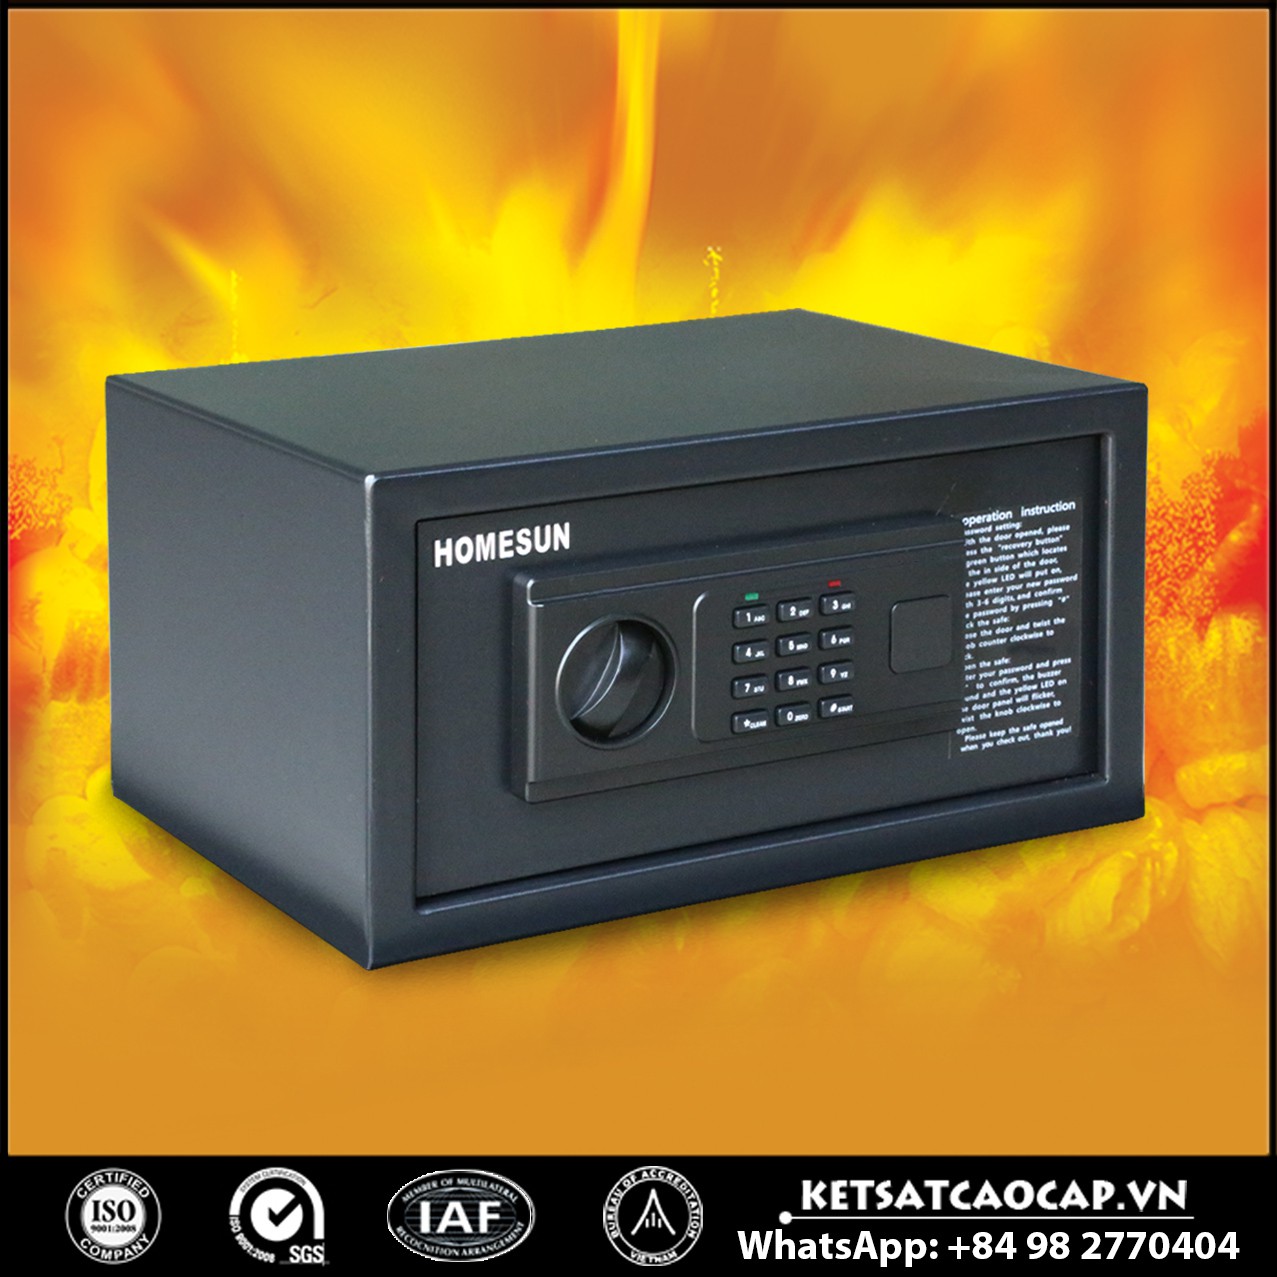 Best Sellers In Hotel Safes Manufacturers - Manufacturers & Suppliers